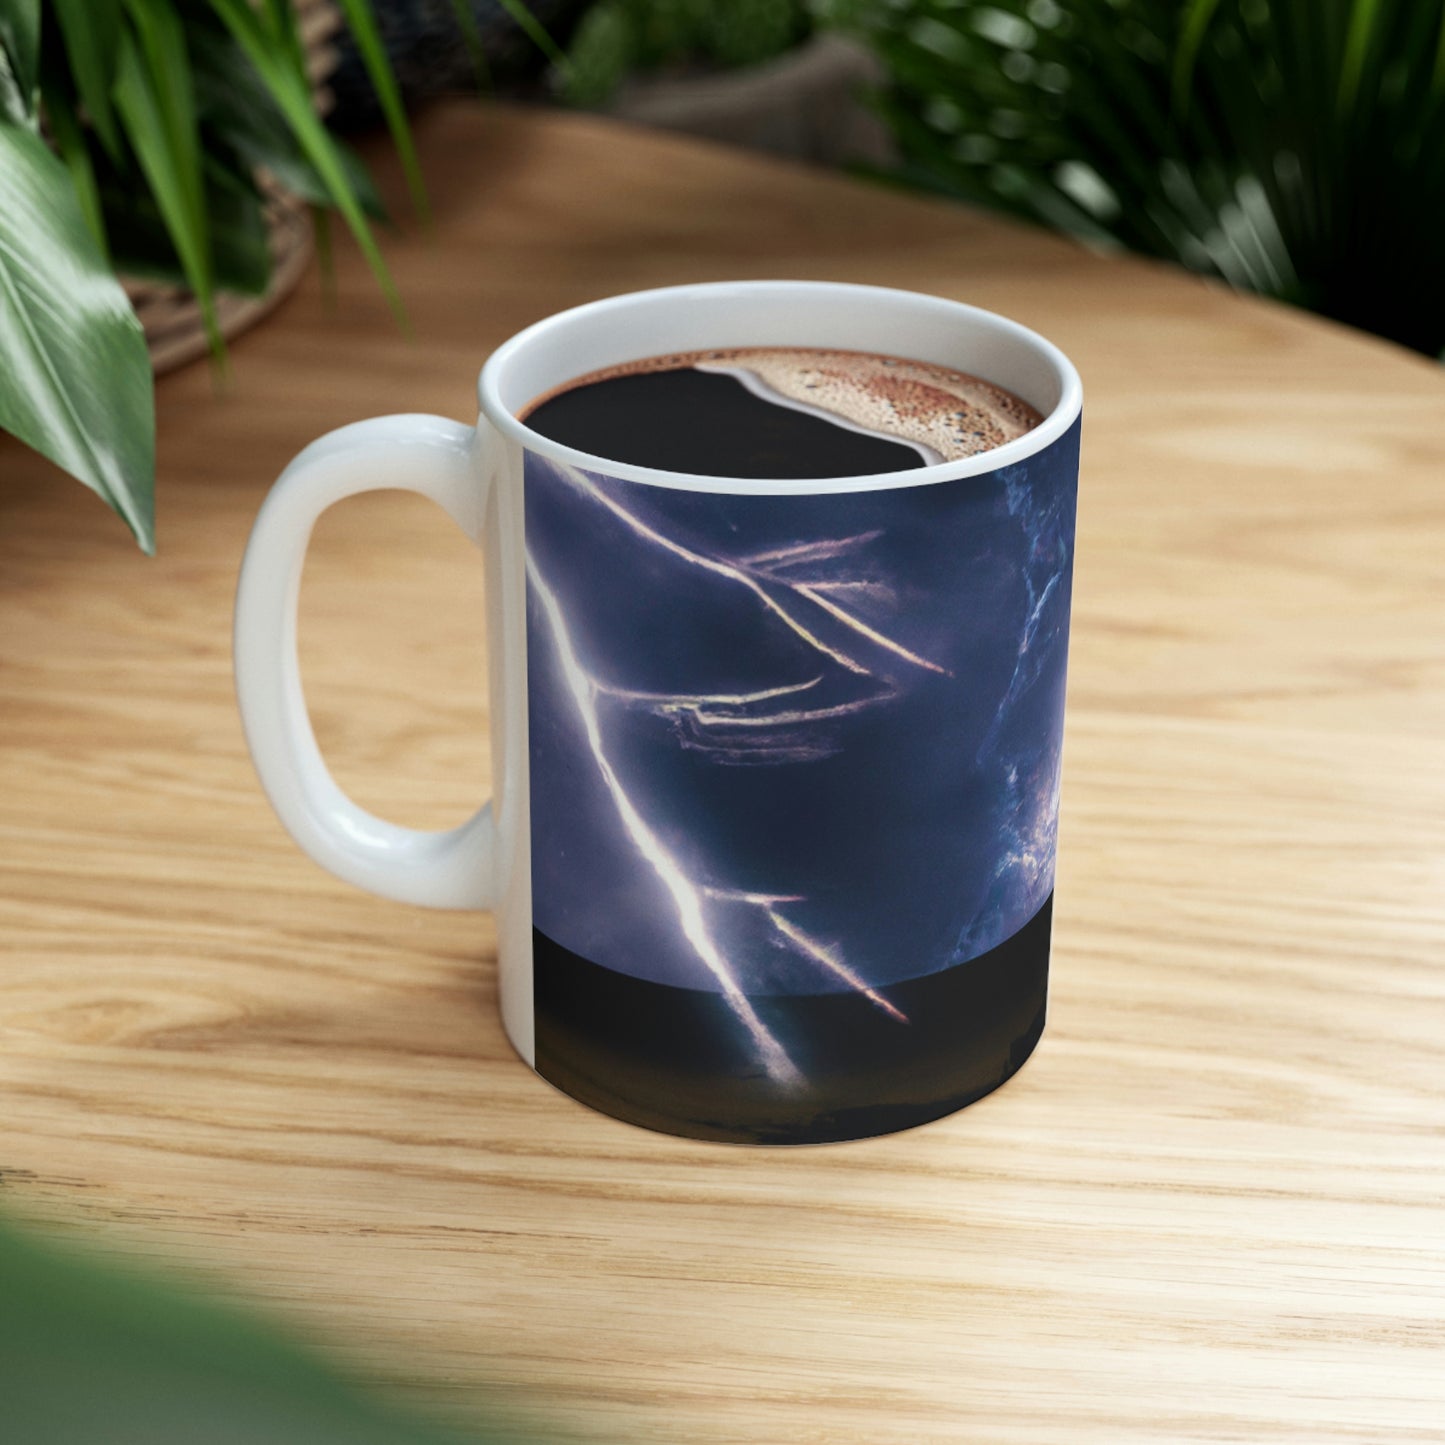 "The Storm Of An Unknown World" - The Alien Ceramic Mug 11 oz